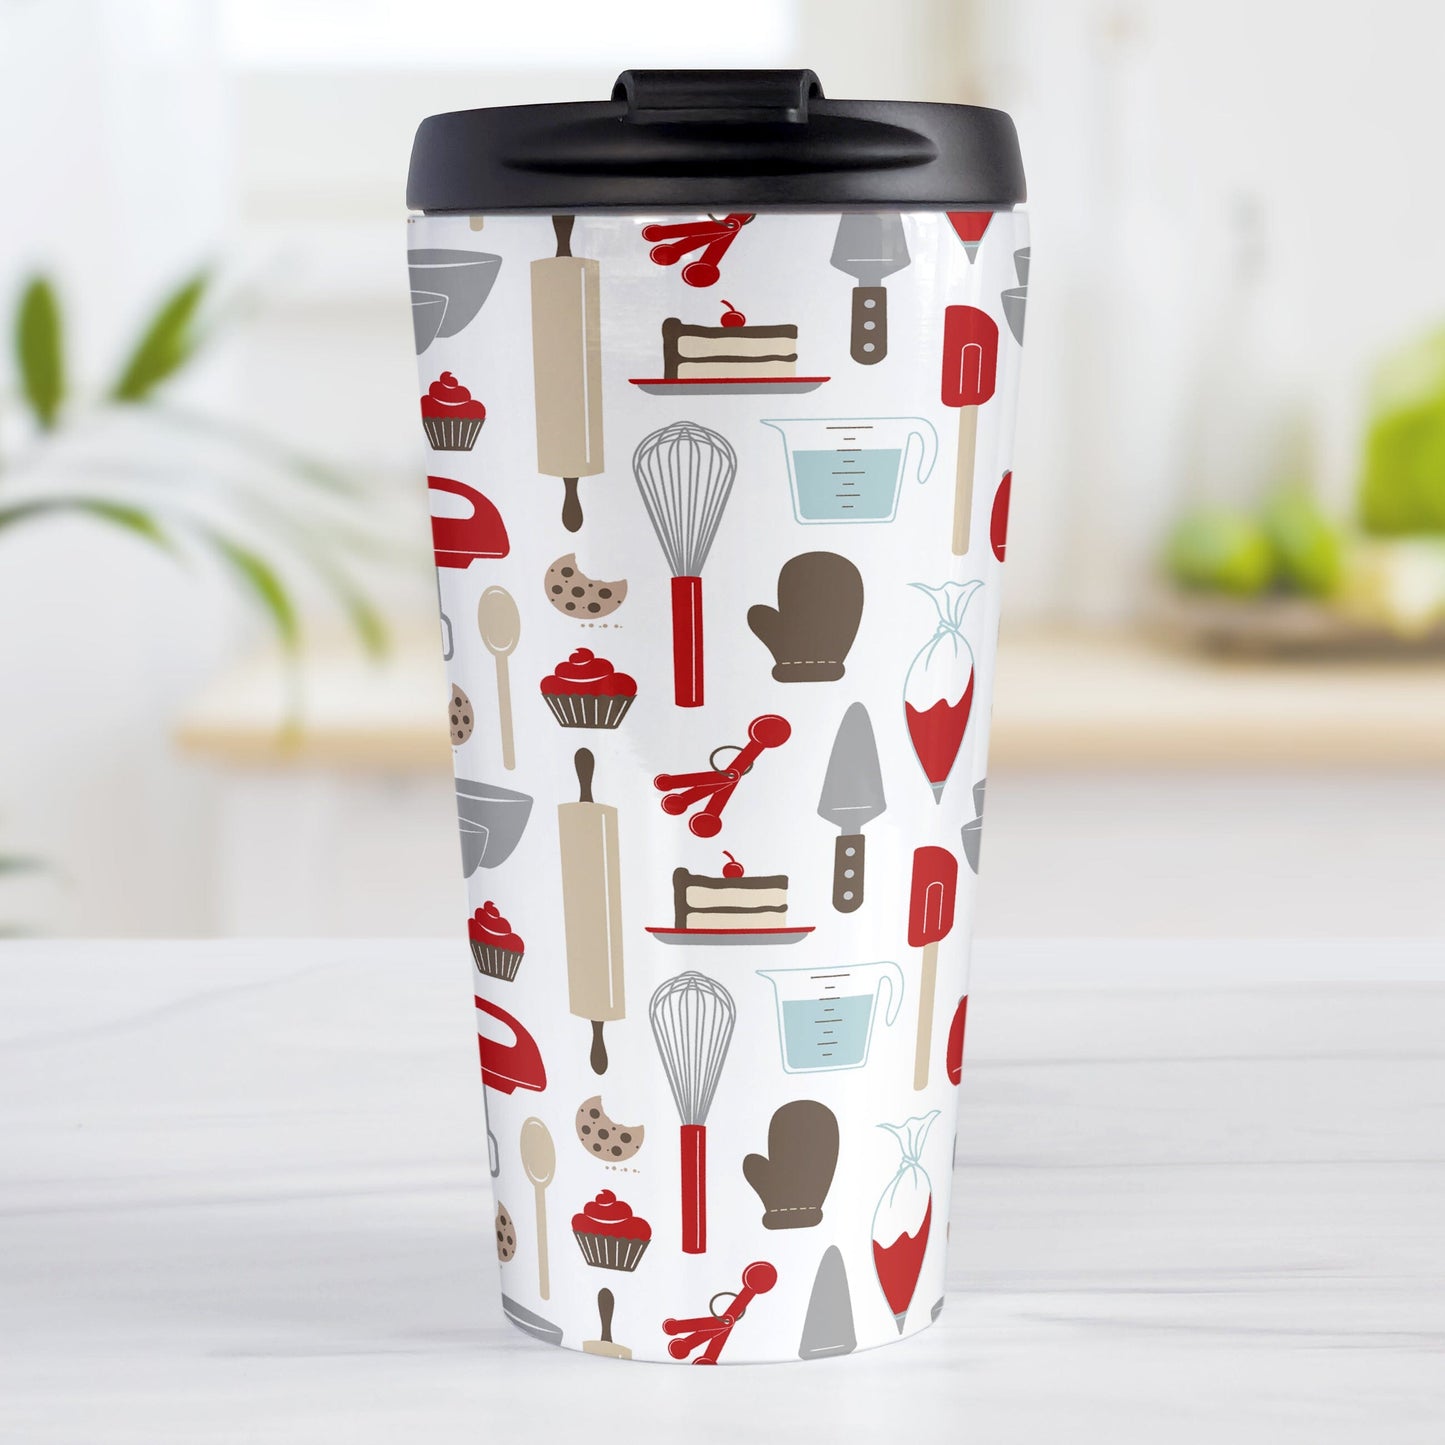 Red Baking Pattern Travel Mug (15oz) at Amy's Coffee Mugs. A stainless steel travel mug designed with a pattern of baking tools like spatulas, whisks, mixers, bowls, and spoons, with cookies, cupcakes, and cake all in a red, gray, brown, and beige color scheme that wraps around the travel mug. 